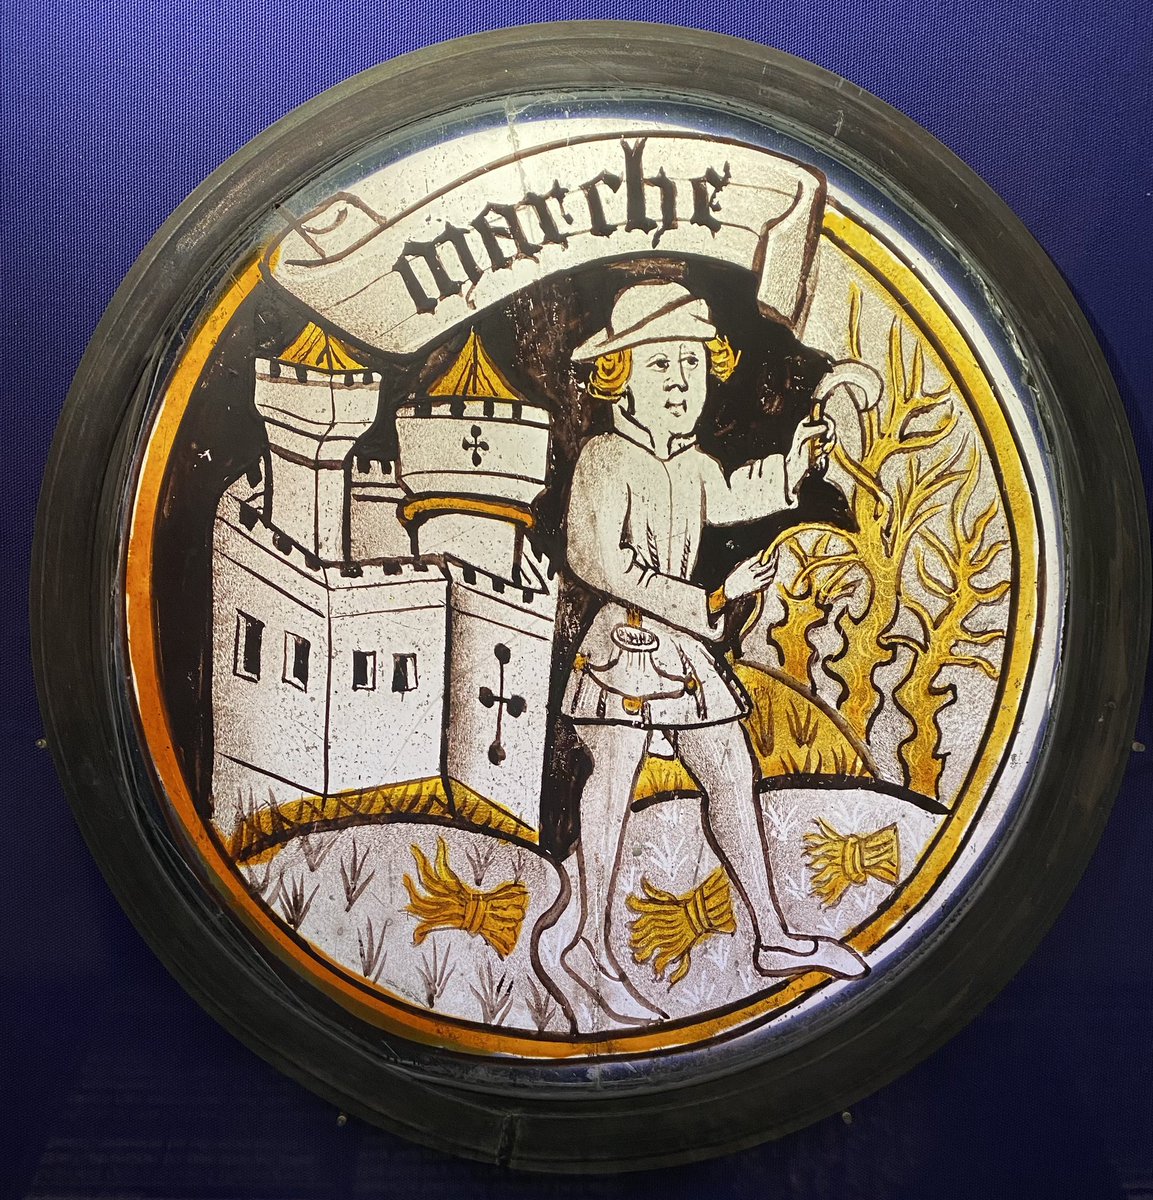 Only a few more days to prune your trees & shrubs! Positively #medieval advice c.1400s ~ #StainedGlass #roundel for March in #LaboursOfTheMonths series @LincsCathedral Exhibition Centre #StainedGlassEveryday @ArtGuideAlex @TheMontyDon @NellytheWillow @Medievalists @hellohistoria